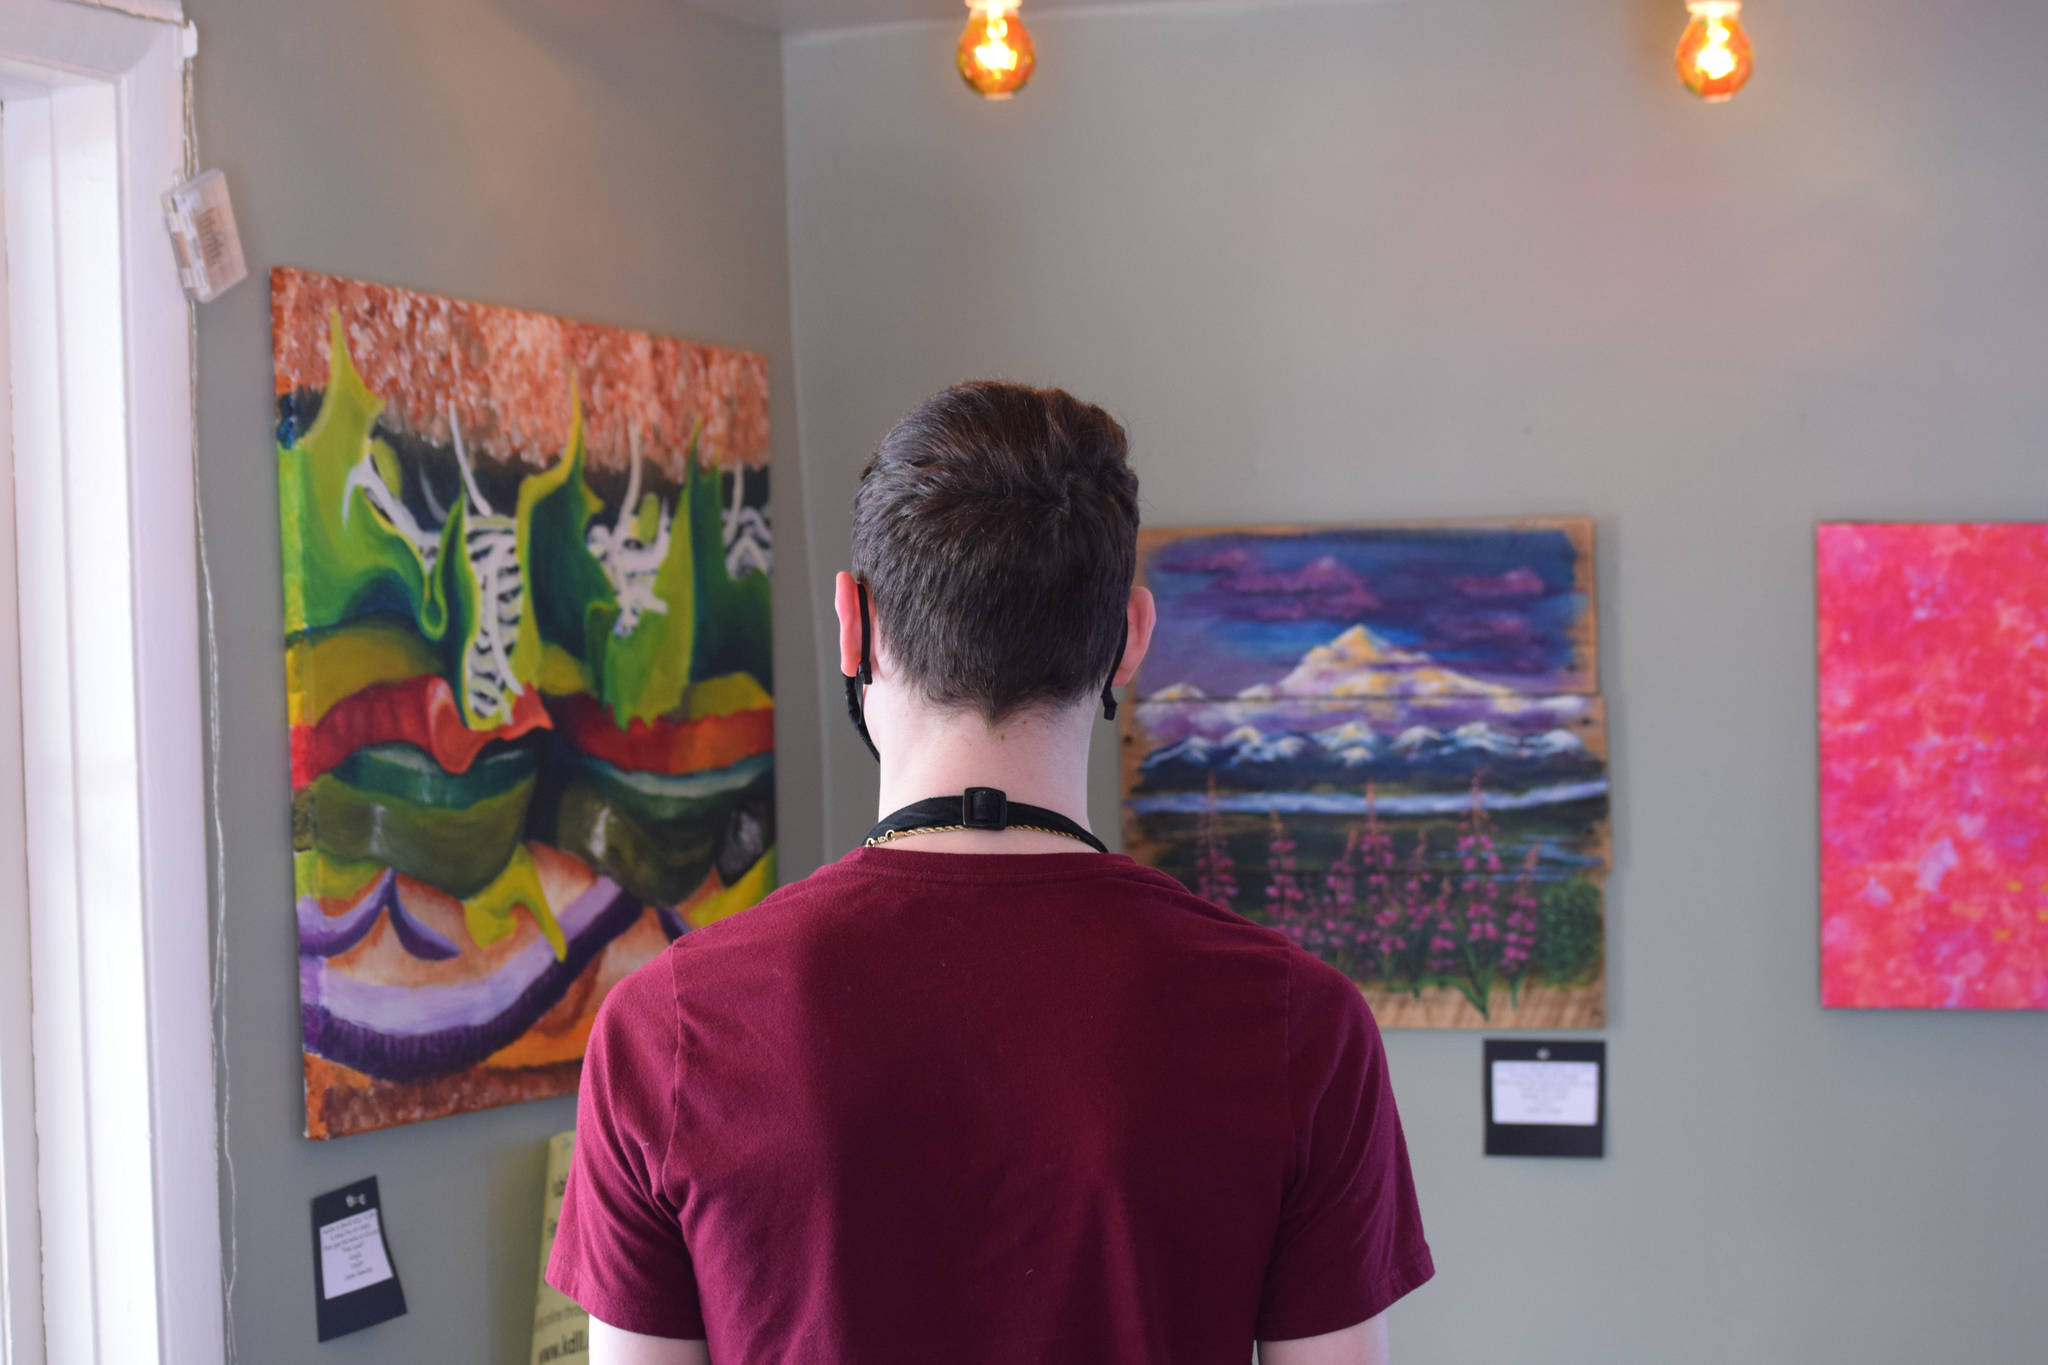 Samuel Anderson examines artwork up for bid while on shift at Veronica’s Cafe on April 7, 2021. The Kenai Fine Art Center and KDLL Public Radio are auctioning off local art through the month of April. (Photo by Camille Botello/Peninsula Clarion)